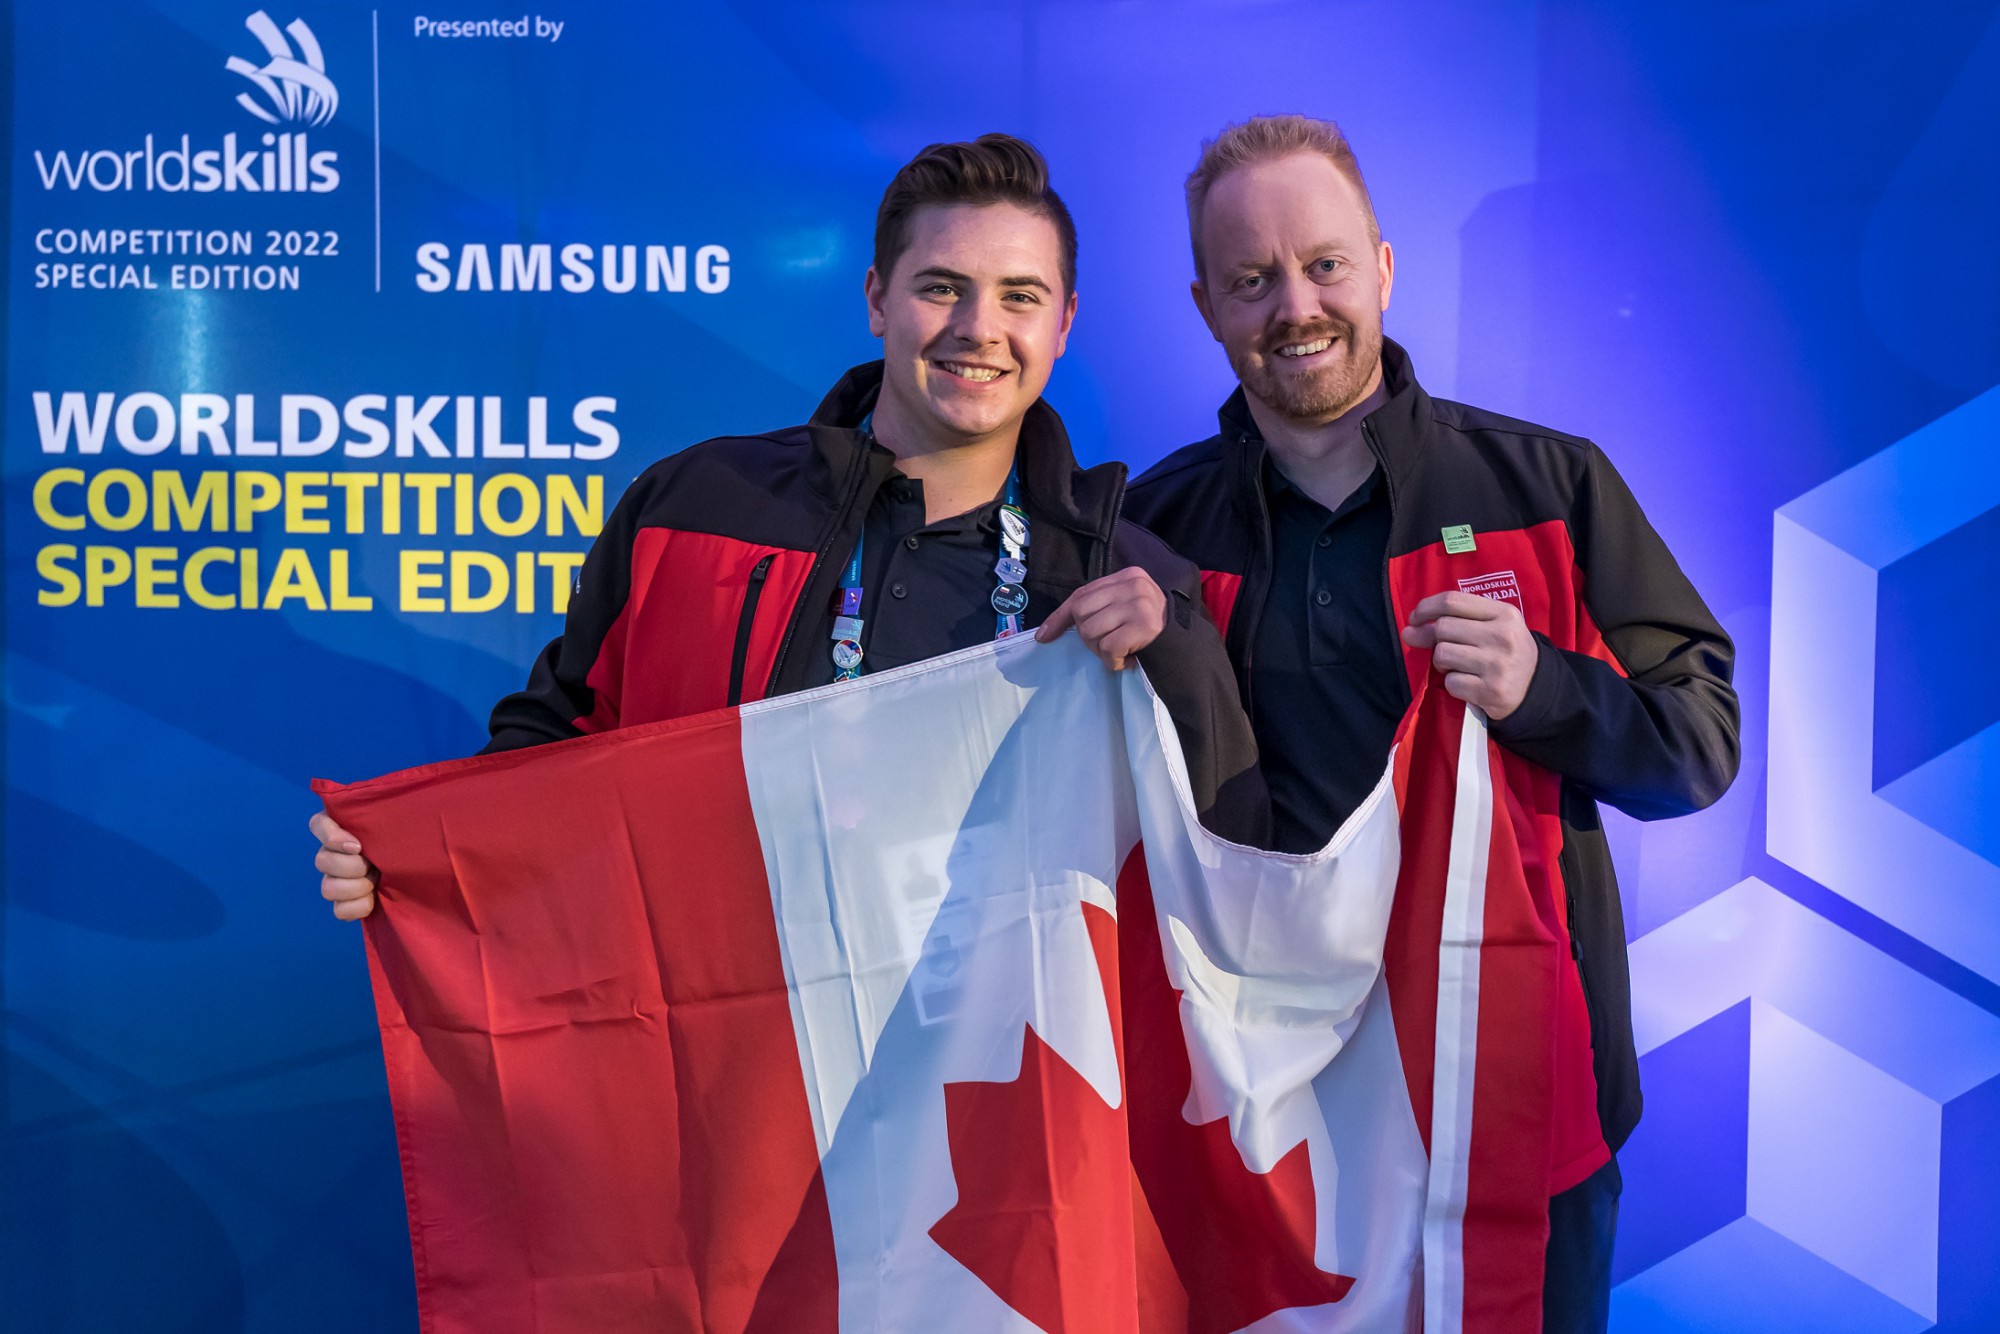 two people hold a Canada flag and smile for the camera